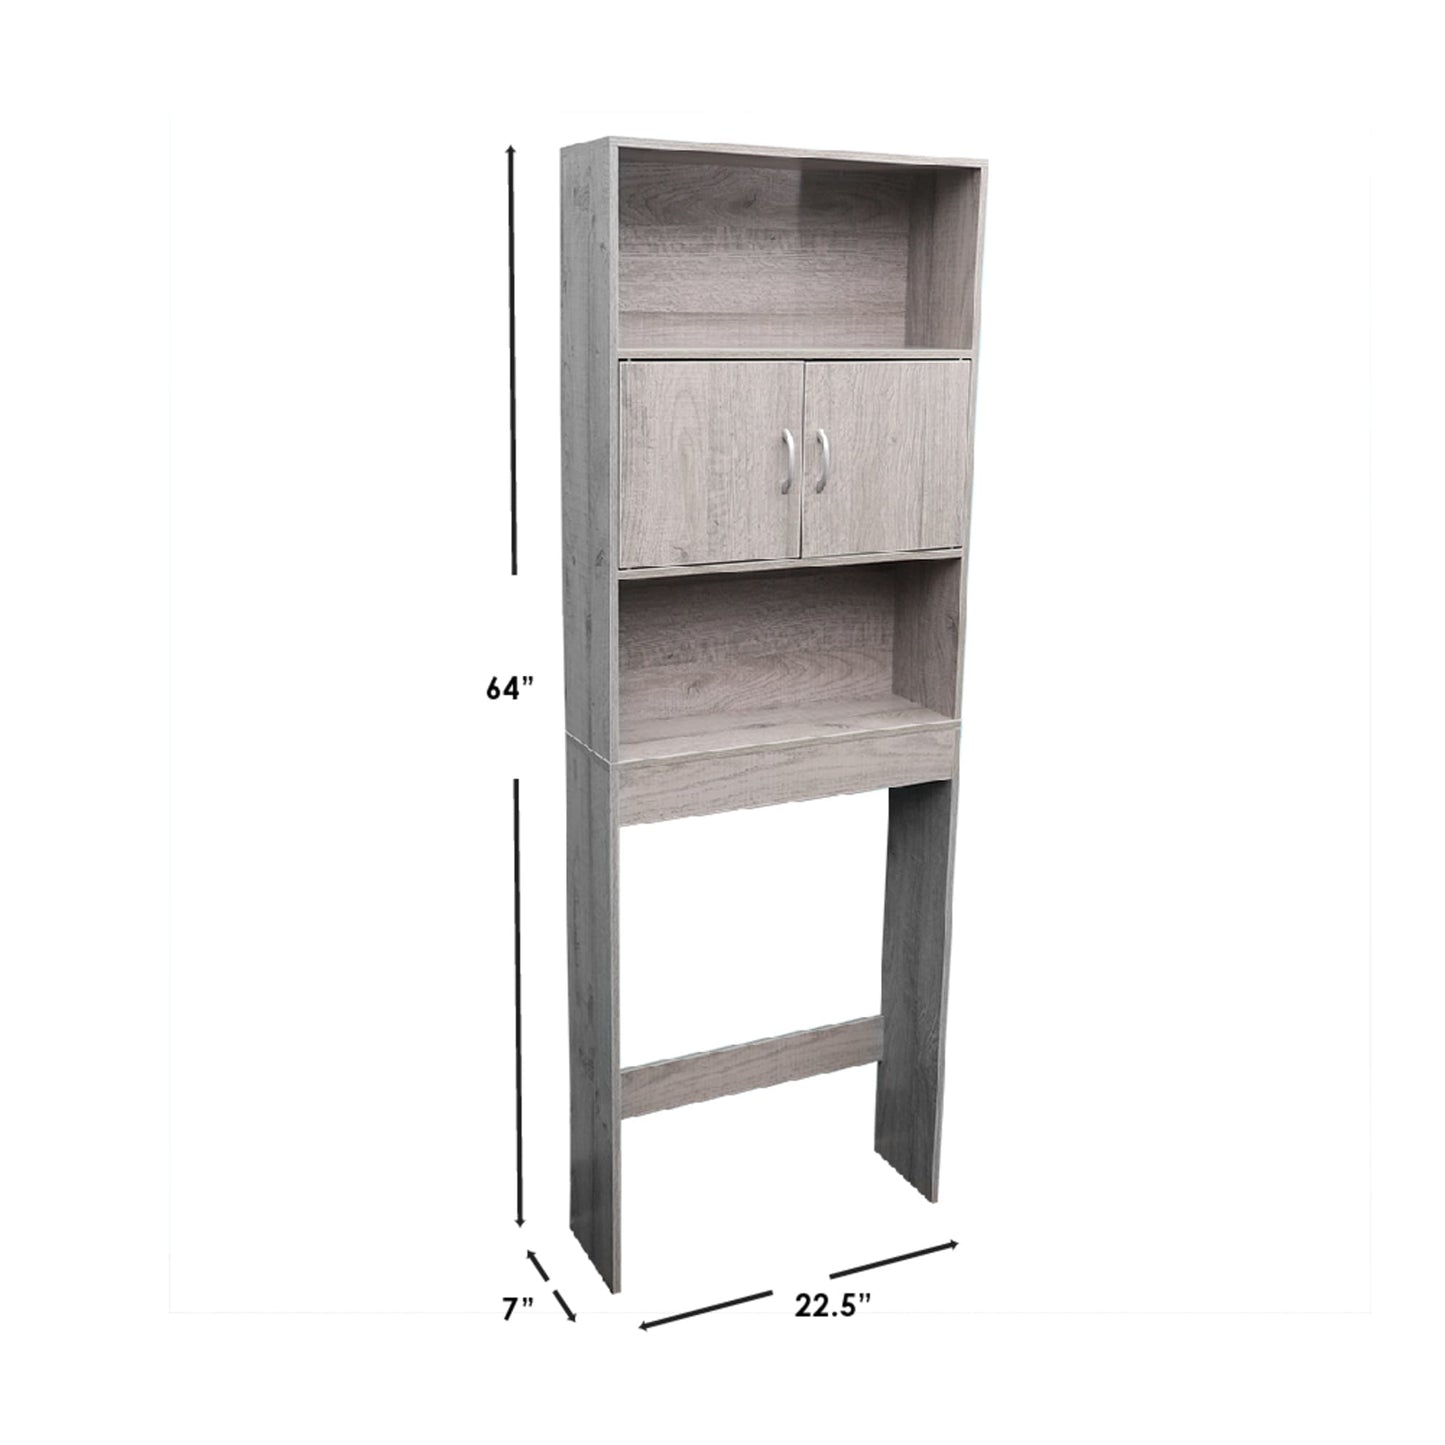 3 Tier Wood Space Saver Over the Toilet Bathroom Shelf with Open Shelving and Cabinets, Grey